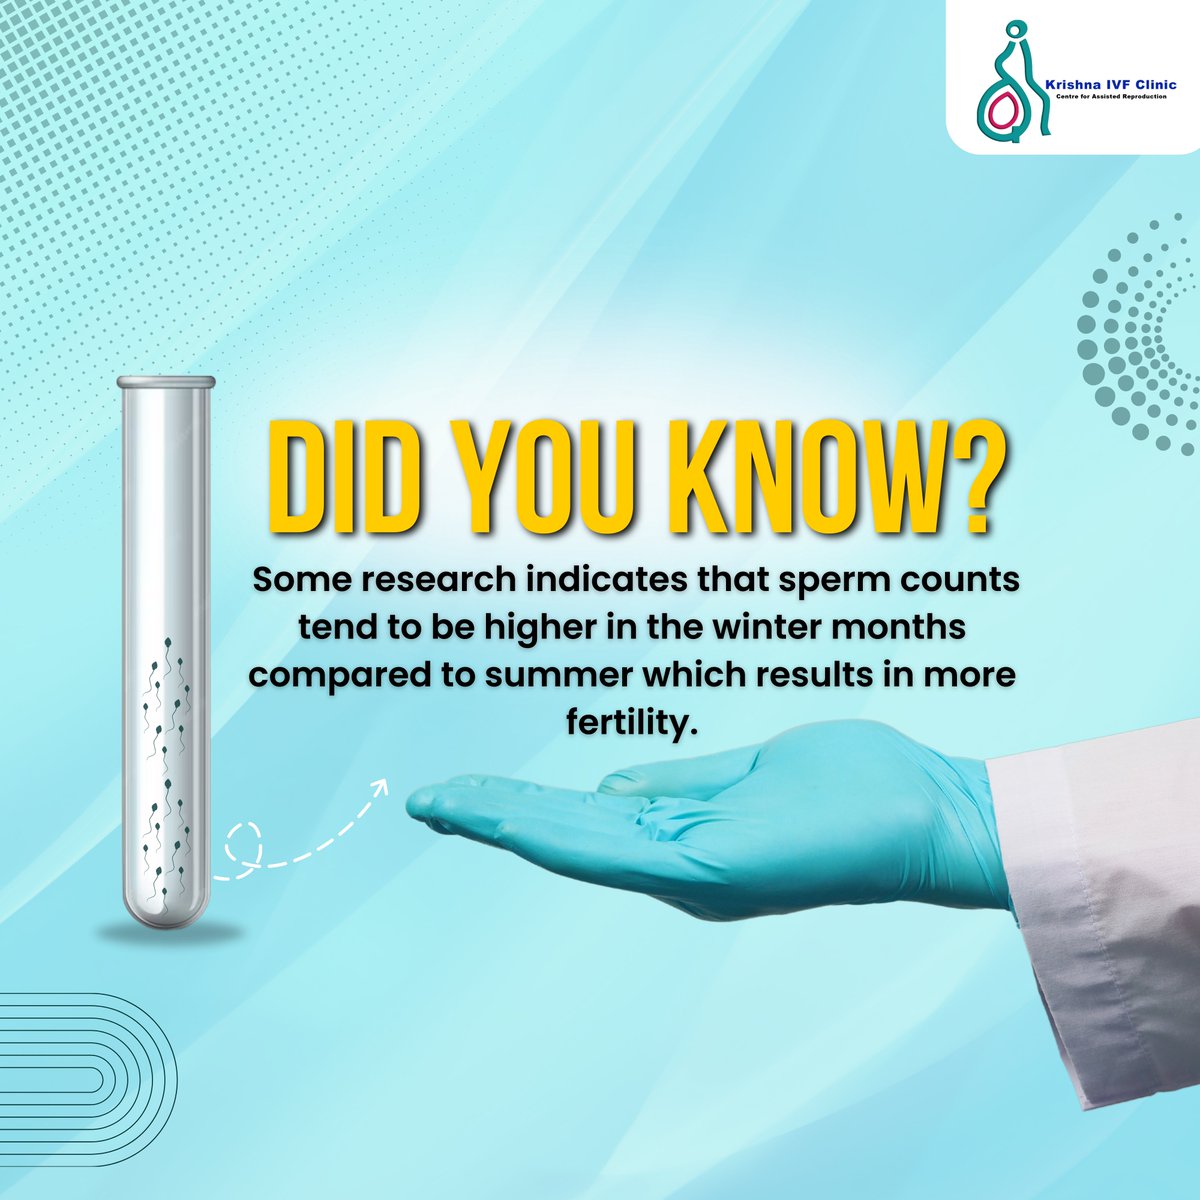 Did you know? Research suggests that sperm counts peak during the colder months, unlocking nature's secret to heightened fertility. 

To book an appointment today call us on +91 9603910004

#krishnaivf #Ivf #ivfcentre #fertility #ivfhospital #family #ivfsuccess #parents